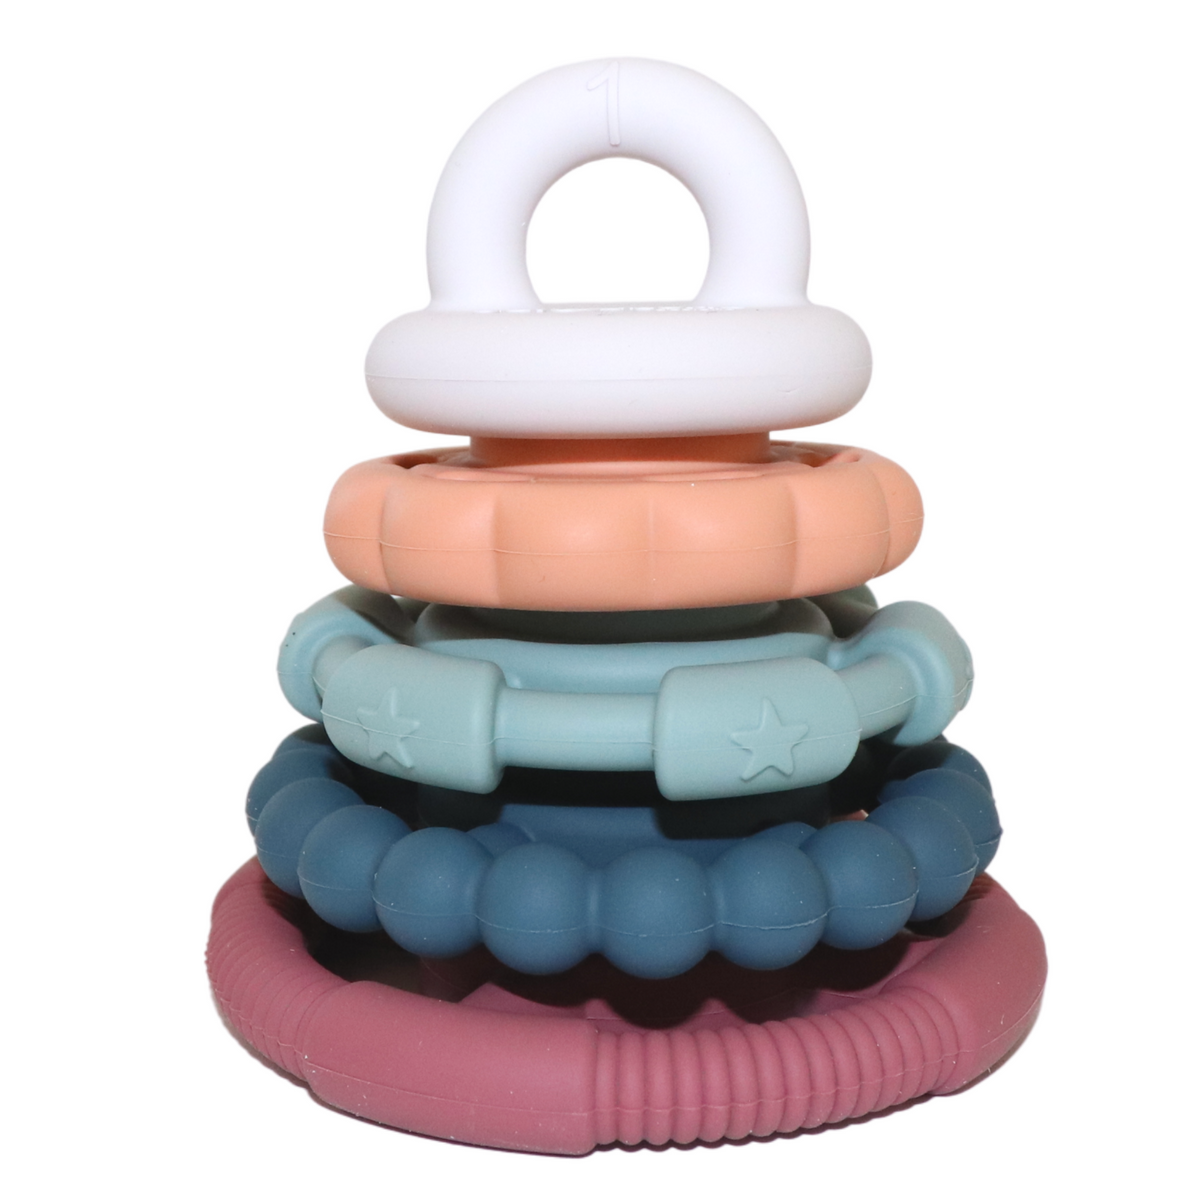 Rainbow Stacker and Teether Toy by Jellystone Designs